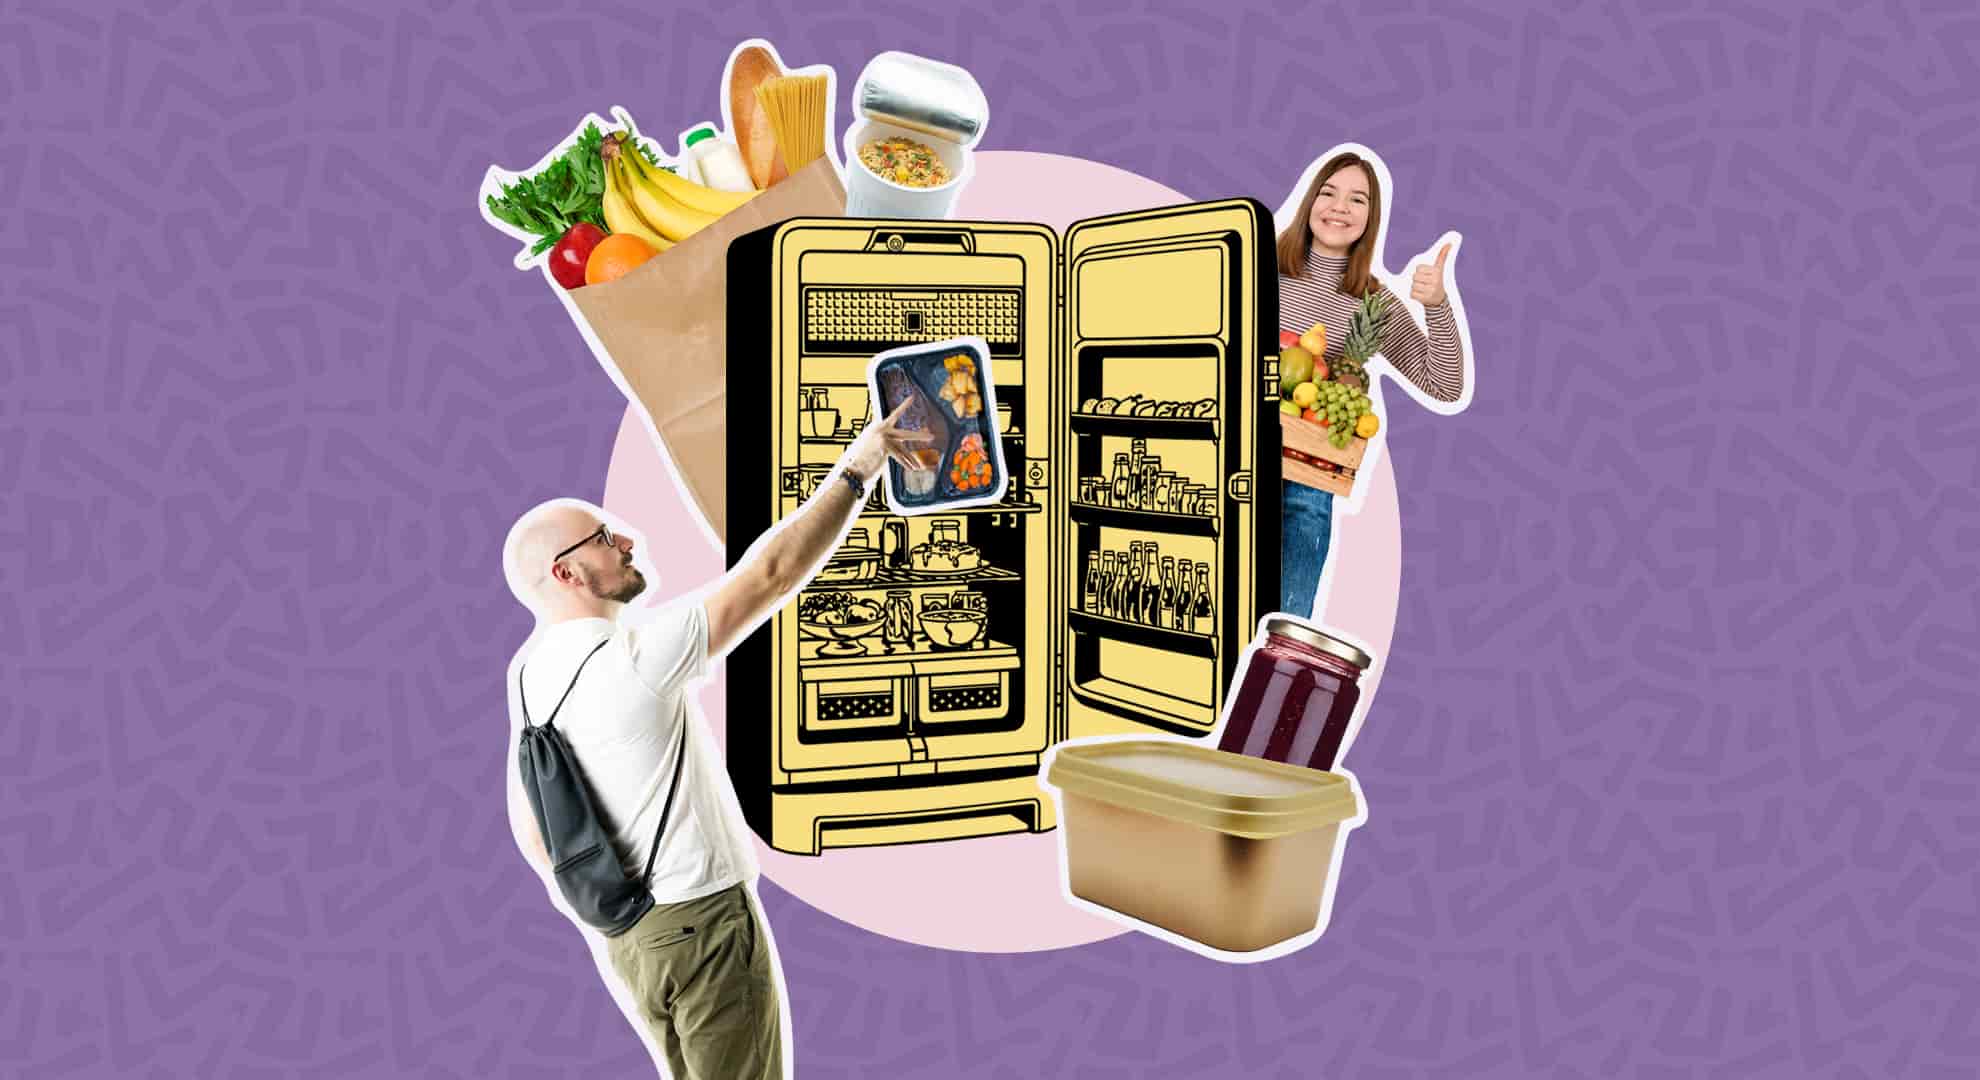 Purple banner with image of a fridge and people accessing food from within the fridge.